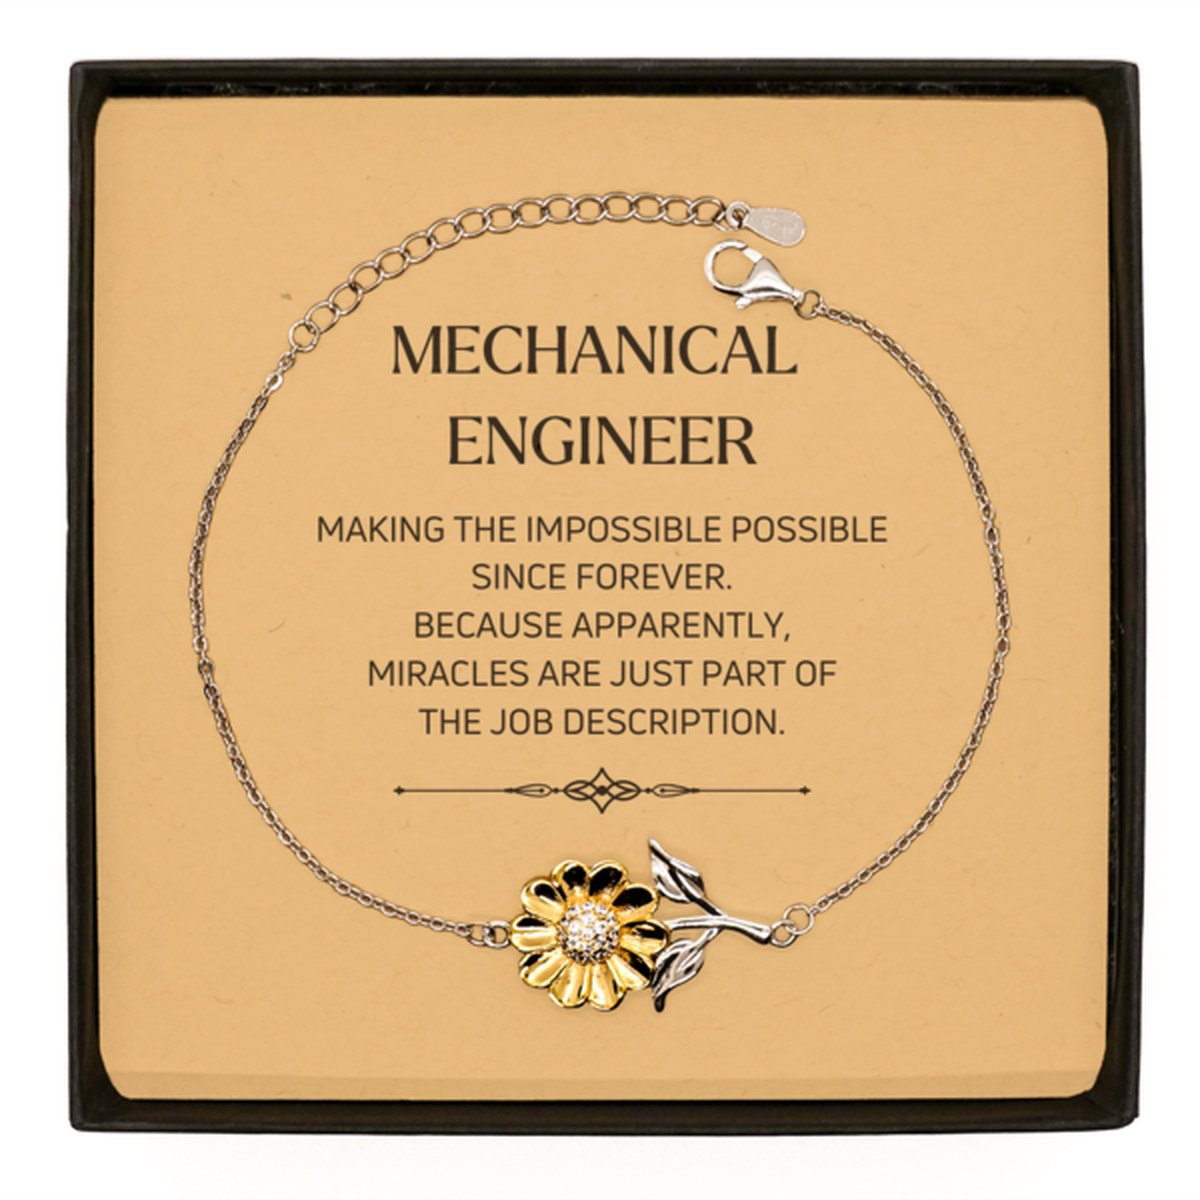 Funny Mechanical Engineer Gifts, Miracles are just part of the job description, Inspirational Birthday Sunflower Bracelet For Mechanical Engineer, Men, Women, Coworkers, Friends, Boss